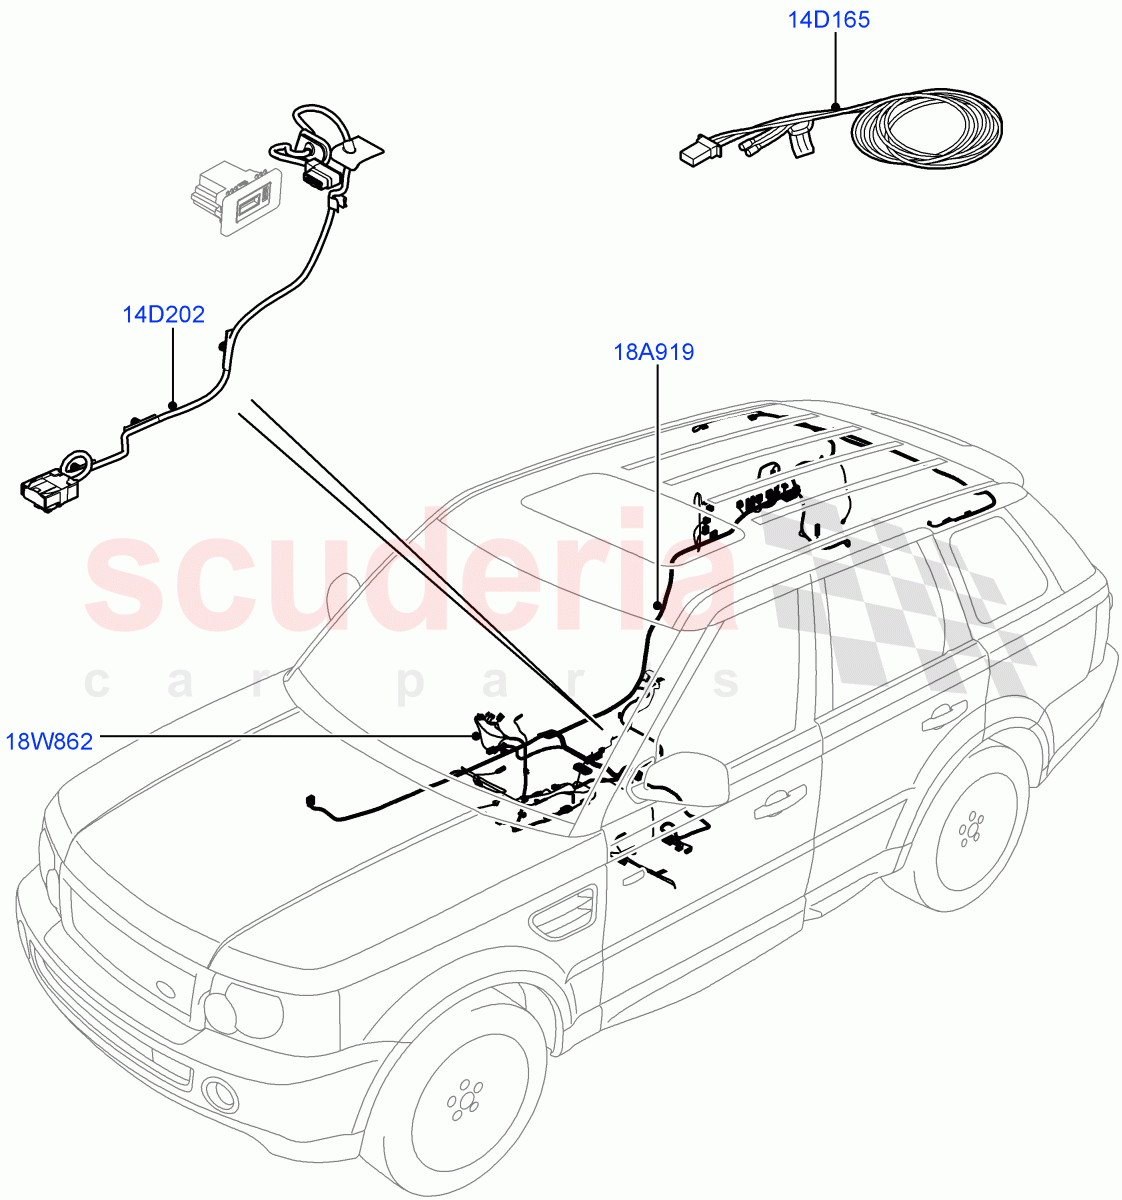 Electrical Wiring - Body And Rear(Audio/Navigation/Entertainment)((V)FROMBA000001,(V)TOBA999999) of Land Rover Land Rover Range Rover Sport (2010-2013) [5.0 OHC SGDI NA V8 Petrol]